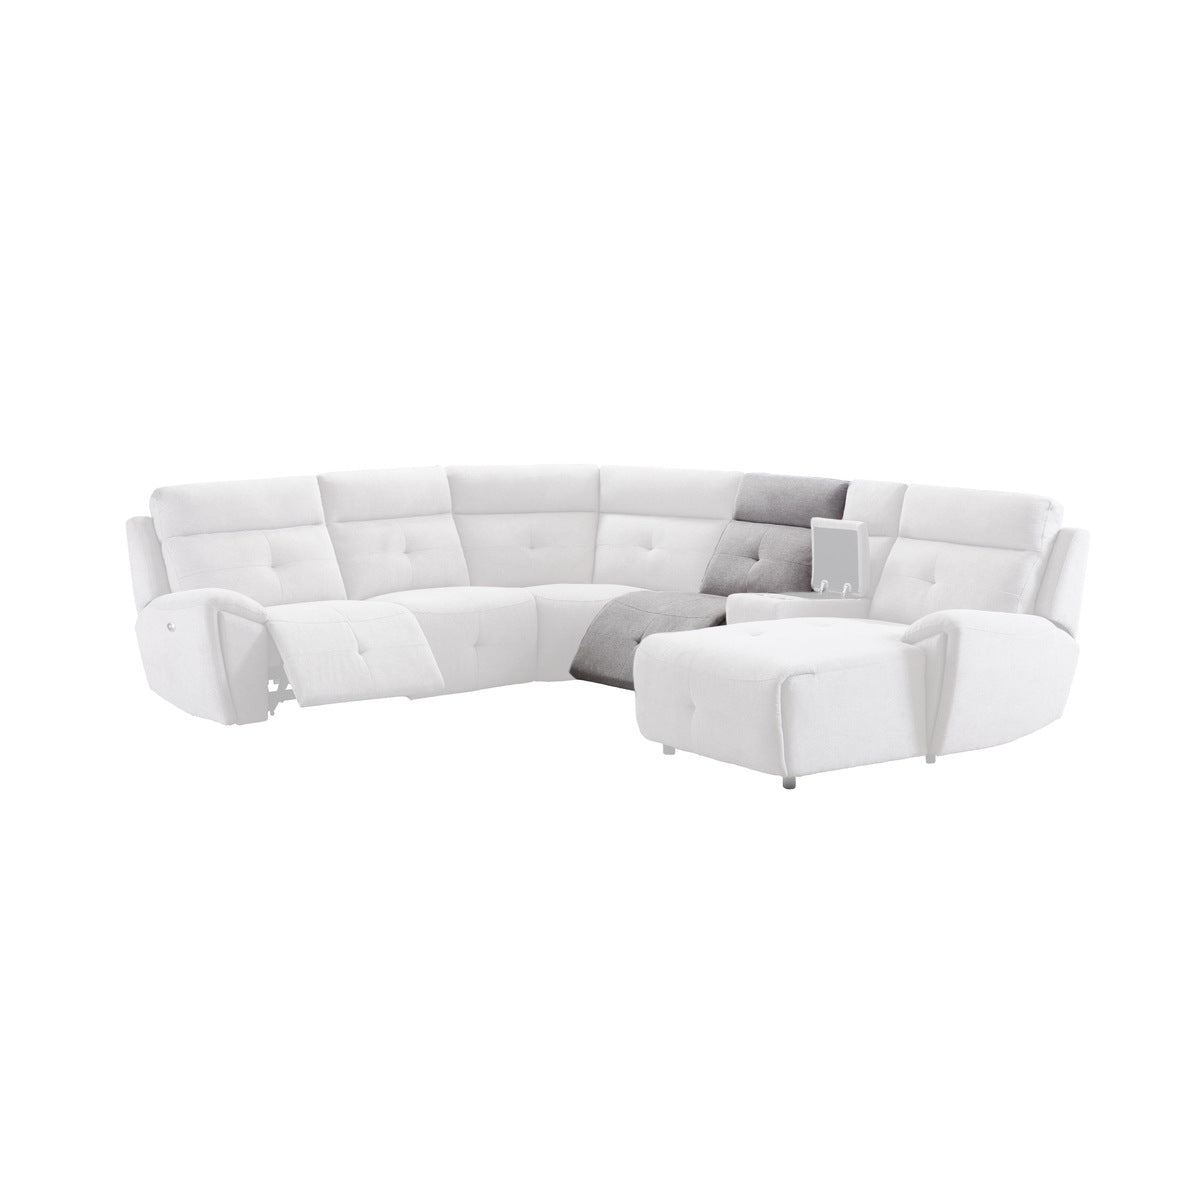 Elijah 6-Piece Modular Power Reclining Sectional with Right Side Chaise 99858GRY RSF